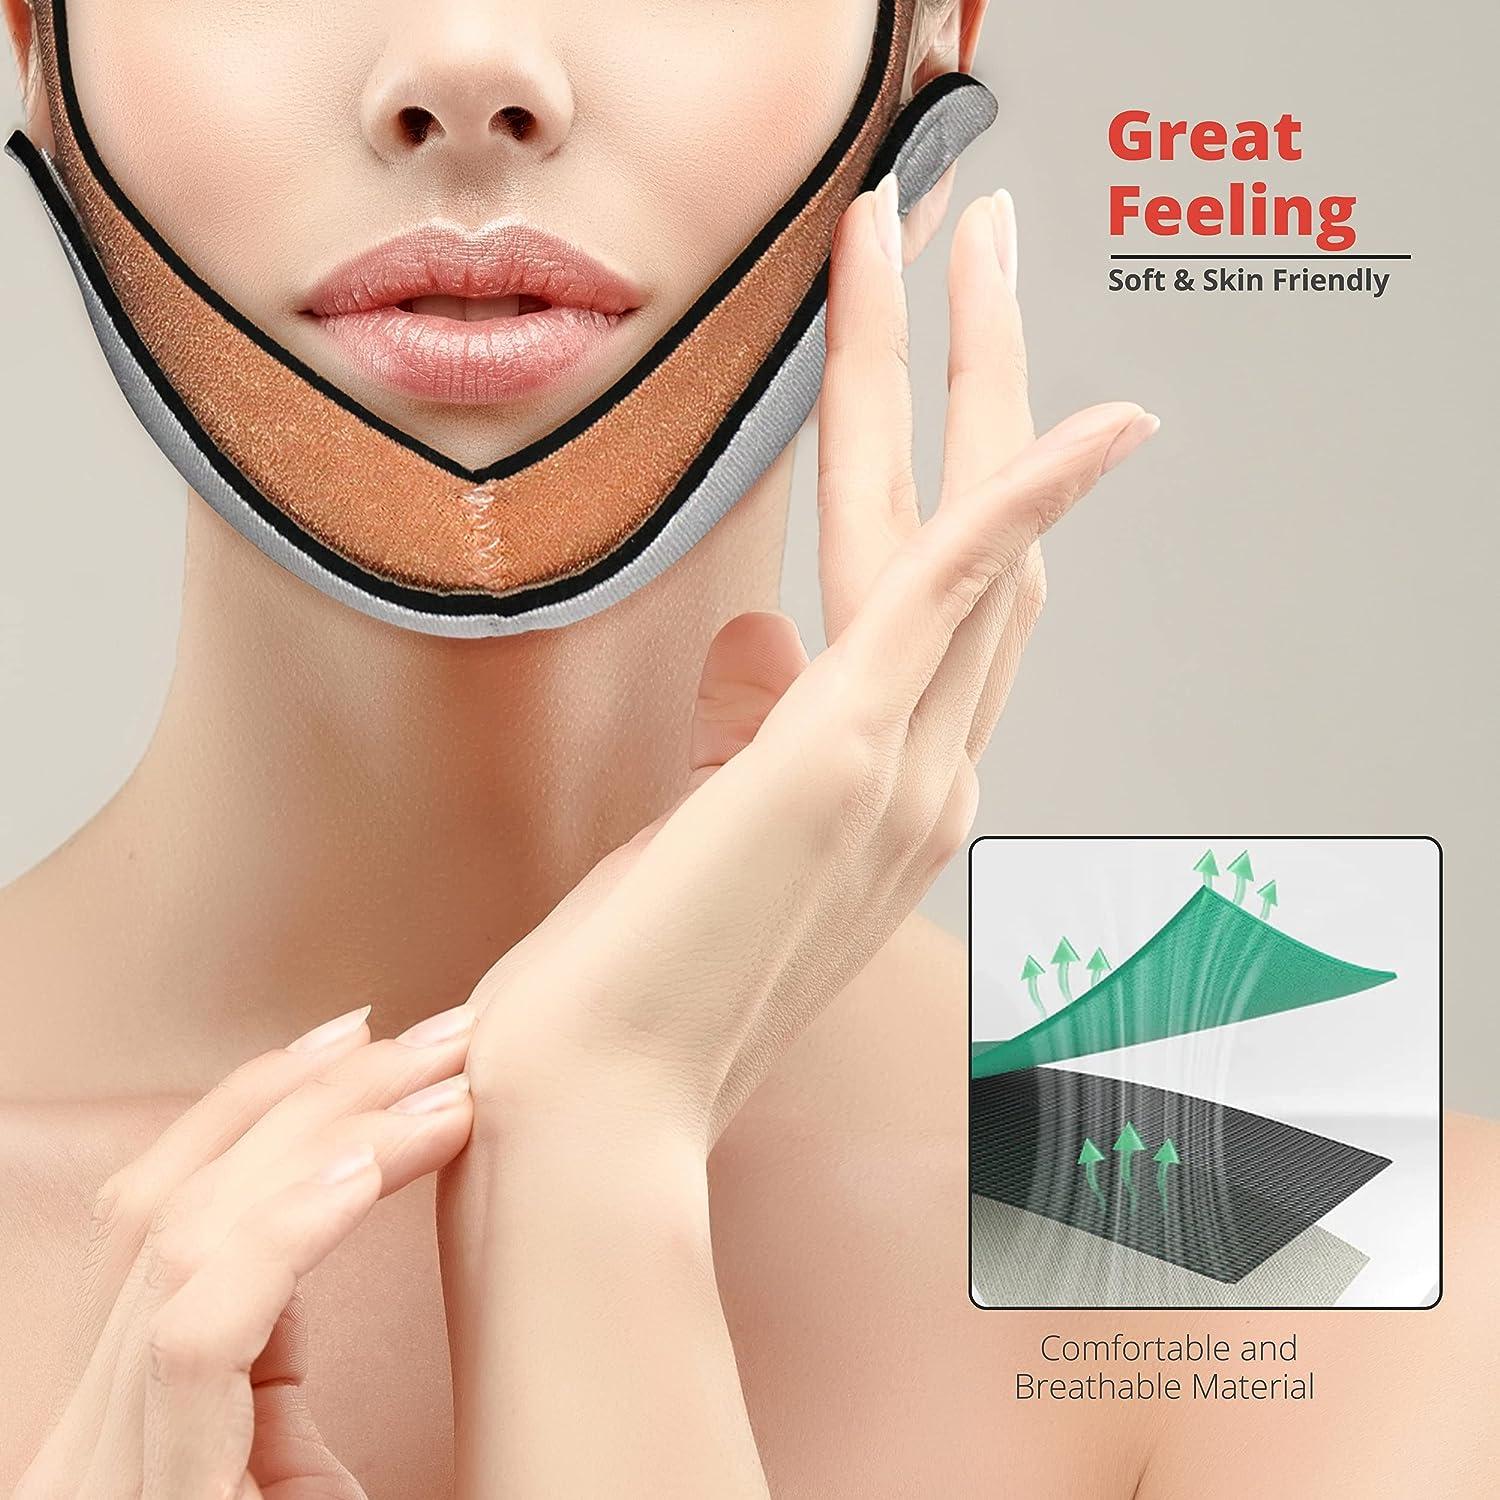 Double Chin Reducer,Face Slimming Strap,V line Lifting Mask